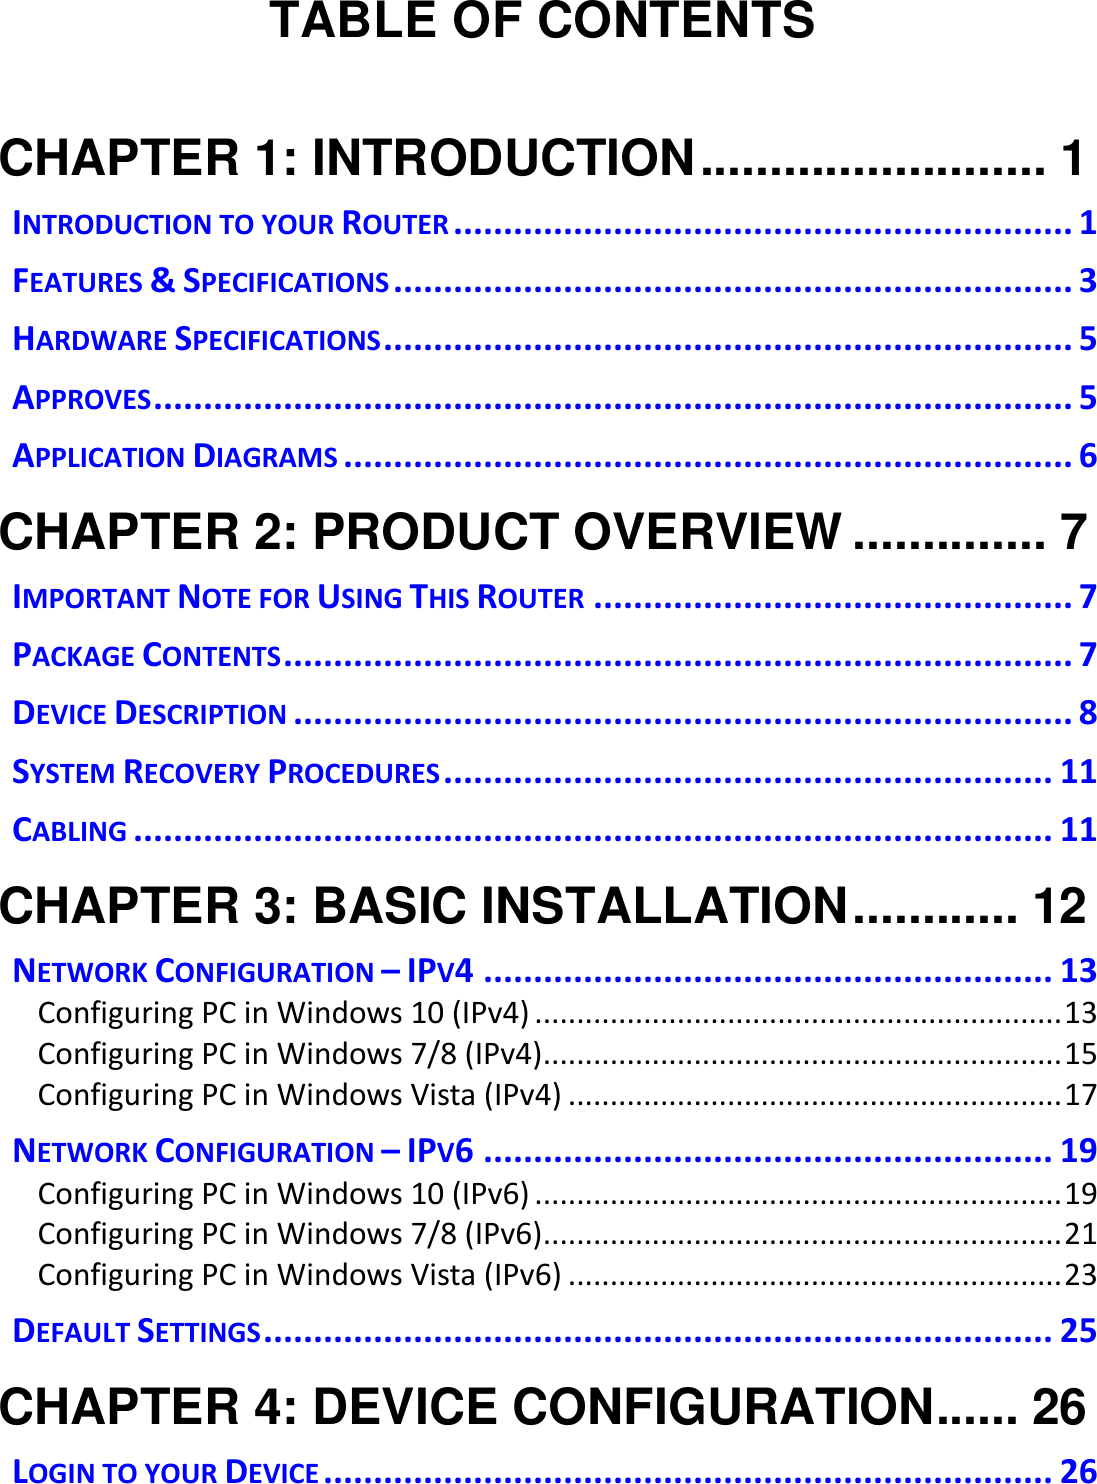   TABLE OF CONTENTS  CHAPTER 1: INTRODUCTION ......................... 1 INTRODUCTION TO YOUR ROUTER .............................................................. 1 FEATURES &amp; SPECIFICATIONS .................................................................... 3 HARDWARE SPECIFICATIONS ..................................................................... 5 APPROVES ............................................................................................ 5 APPLICATION DIAGRAMS ......................................................................... 6 CHAPTER 2: PRODUCT OVERVIEW .............. 7 IMPORTANT NOTE FOR USING THIS ROUTER ................................................ 7 PACKAGE CONTENTS ............................................................................... 7 DEVICE DESCRIPTION .............................................................................. 8 SYSTEM RECOVERY PROCEDURES ............................................................. 11 CABLING ............................................................................................ 11 CHAPTER 3: BASIC INSTALLATION ............ 12 NETWORK CONFIGURATION – IPV4 ......................................................... 13 Configuring PC in Windows 10 (IPv4) ............................................................... 13 Configuring PC in Windows 7/8 (IPv4) .............................................................. 15 Configuring PC in Windows Vista (IPv4) ........................................................... 17 NETWORK CONFIGURATION – IPV6 ......................................................... 19 Configuring PC in Windows 10 (IPv6) ............................................................... 19 Configuring PC in Windows 7/8 (IPv6) .............................................................. 21 Configuring PC in Windows Vista (IPv6) ........................................................... 23 DEFAULT SETTINGS ............................................................................... 25 CHAPTER 4: DEVICE CONFIGURATION ...... 26 LOGIN TO YOUR DEVICE ......................................................................... 26 